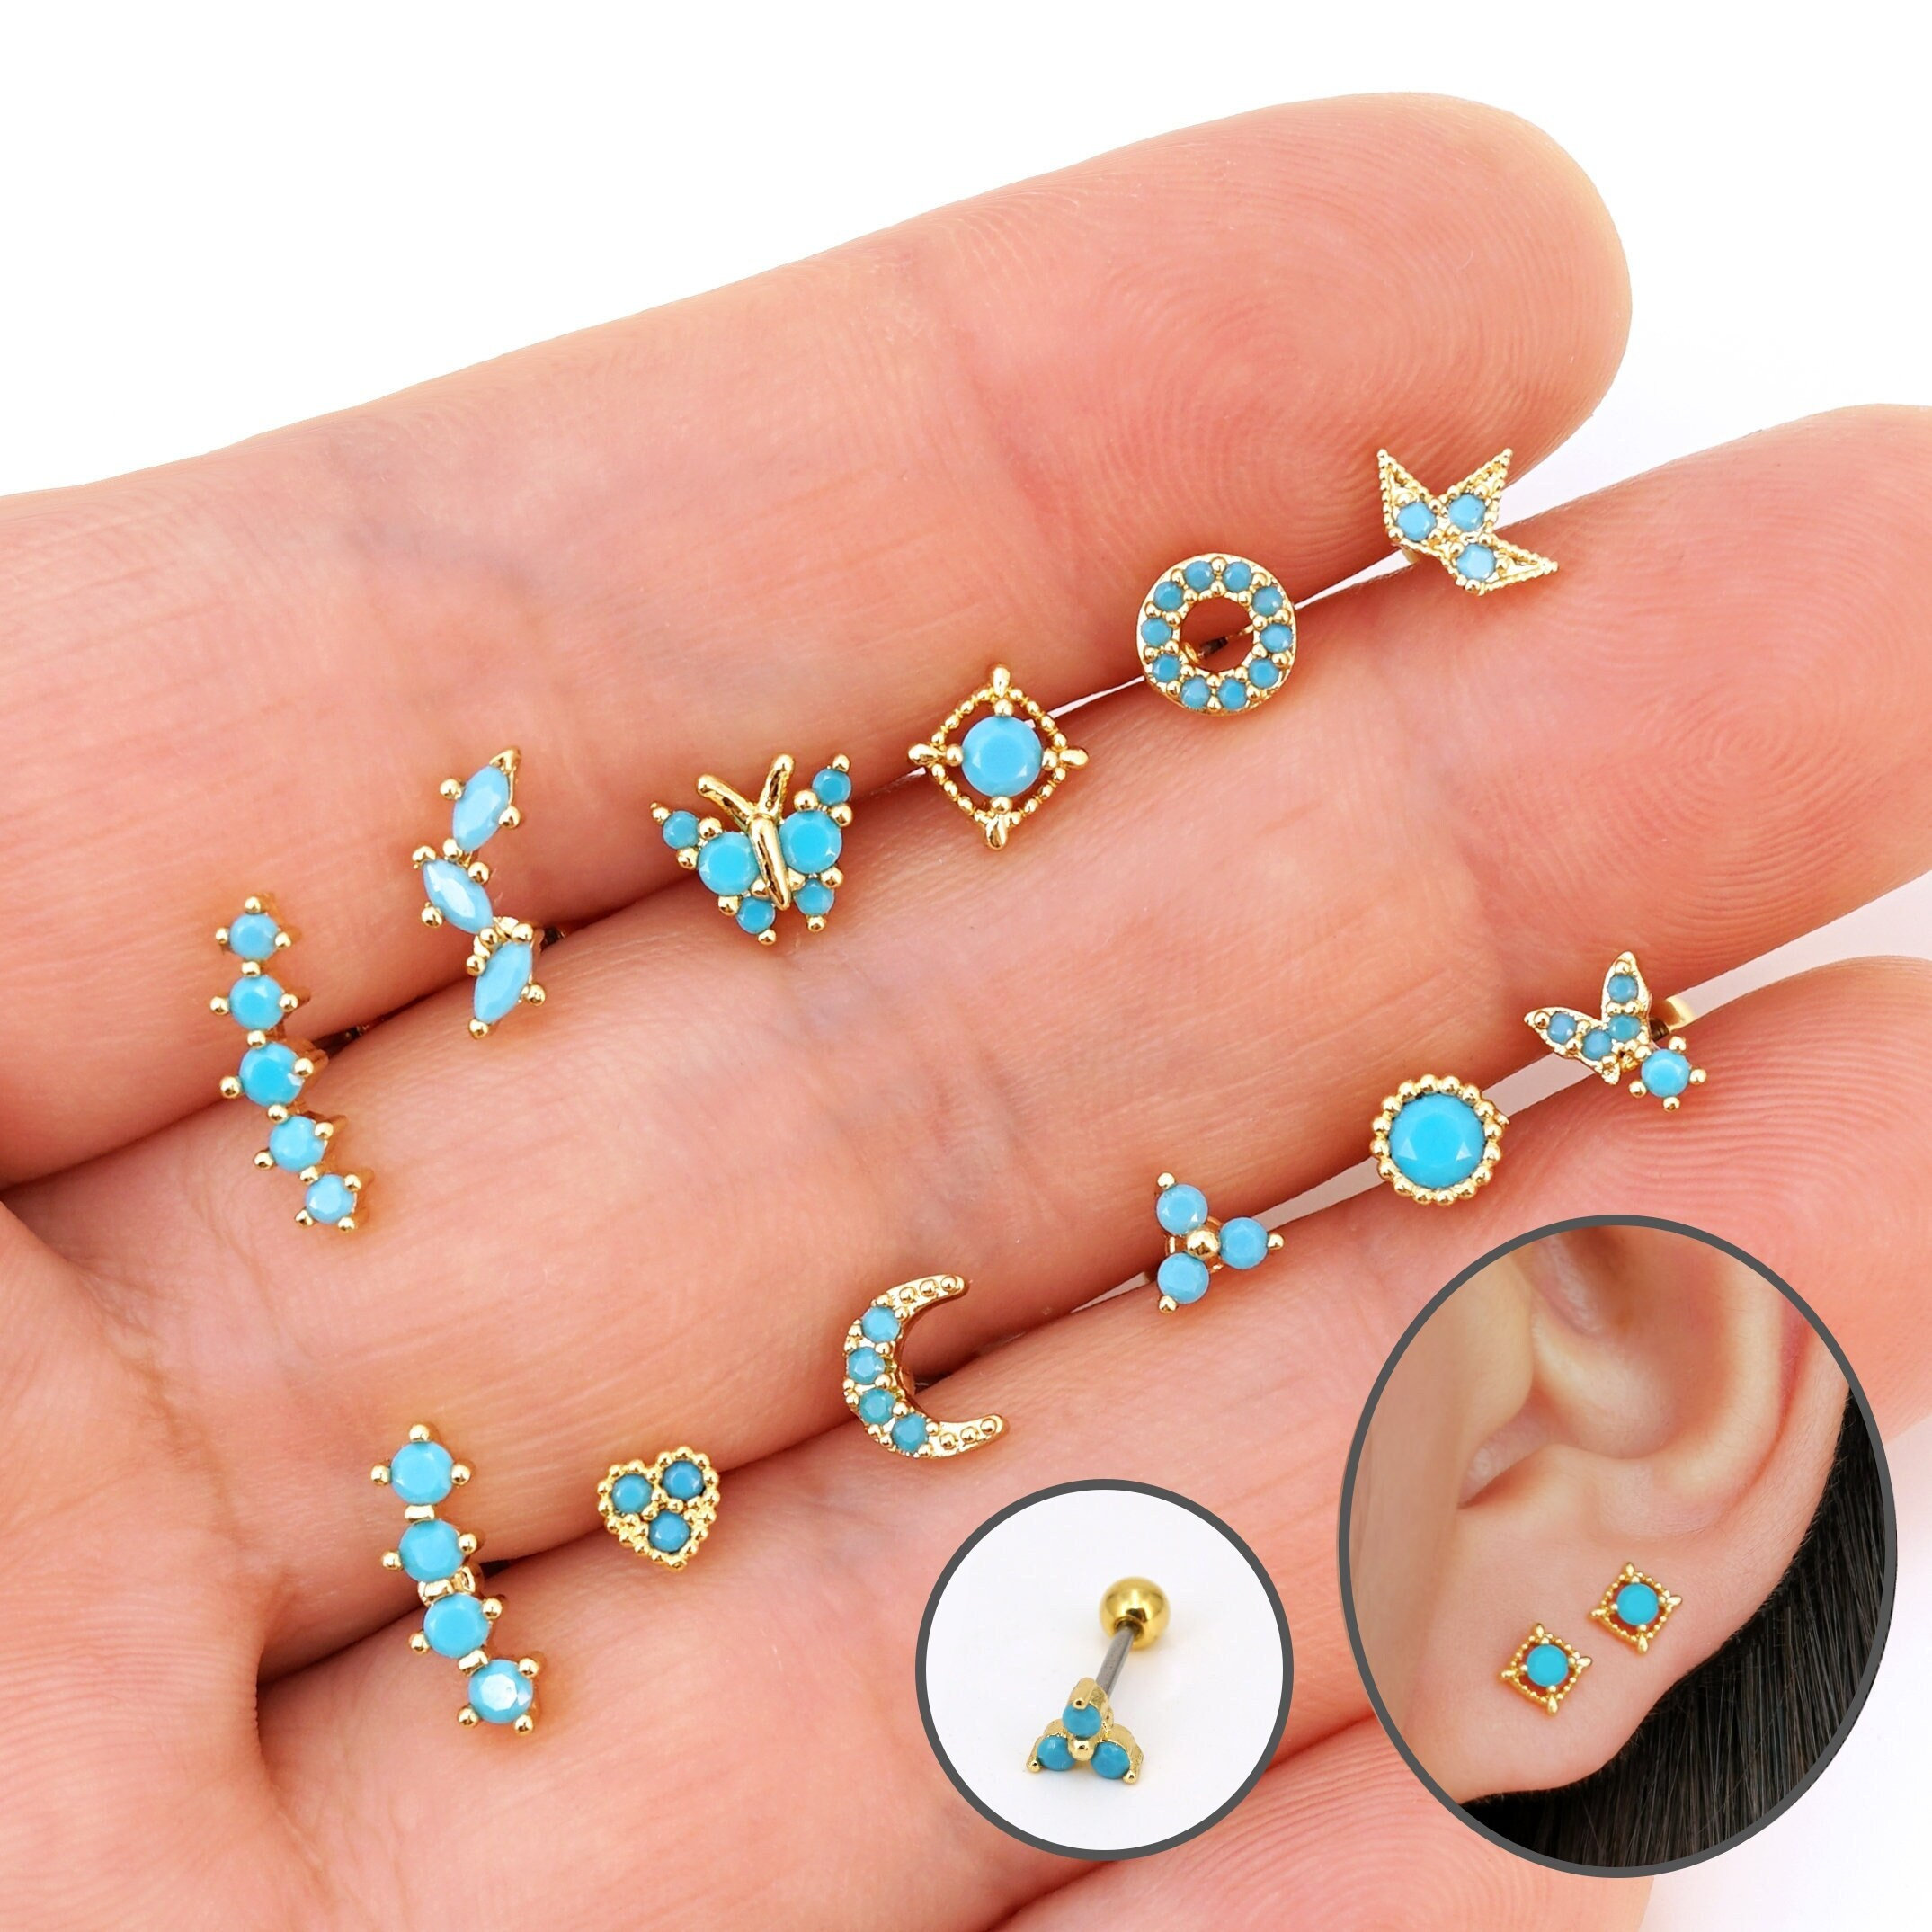  FIBO STEEL 26Pcs Surgical Steel Flat Back Earrings for Women  Multipack Cartilage Earring Studs Hoops CZ Heart Butterfly Helix Piercing  Jewelry Flat Back Design 16G-20G Gold : Clothing, Shoes & Jewelry